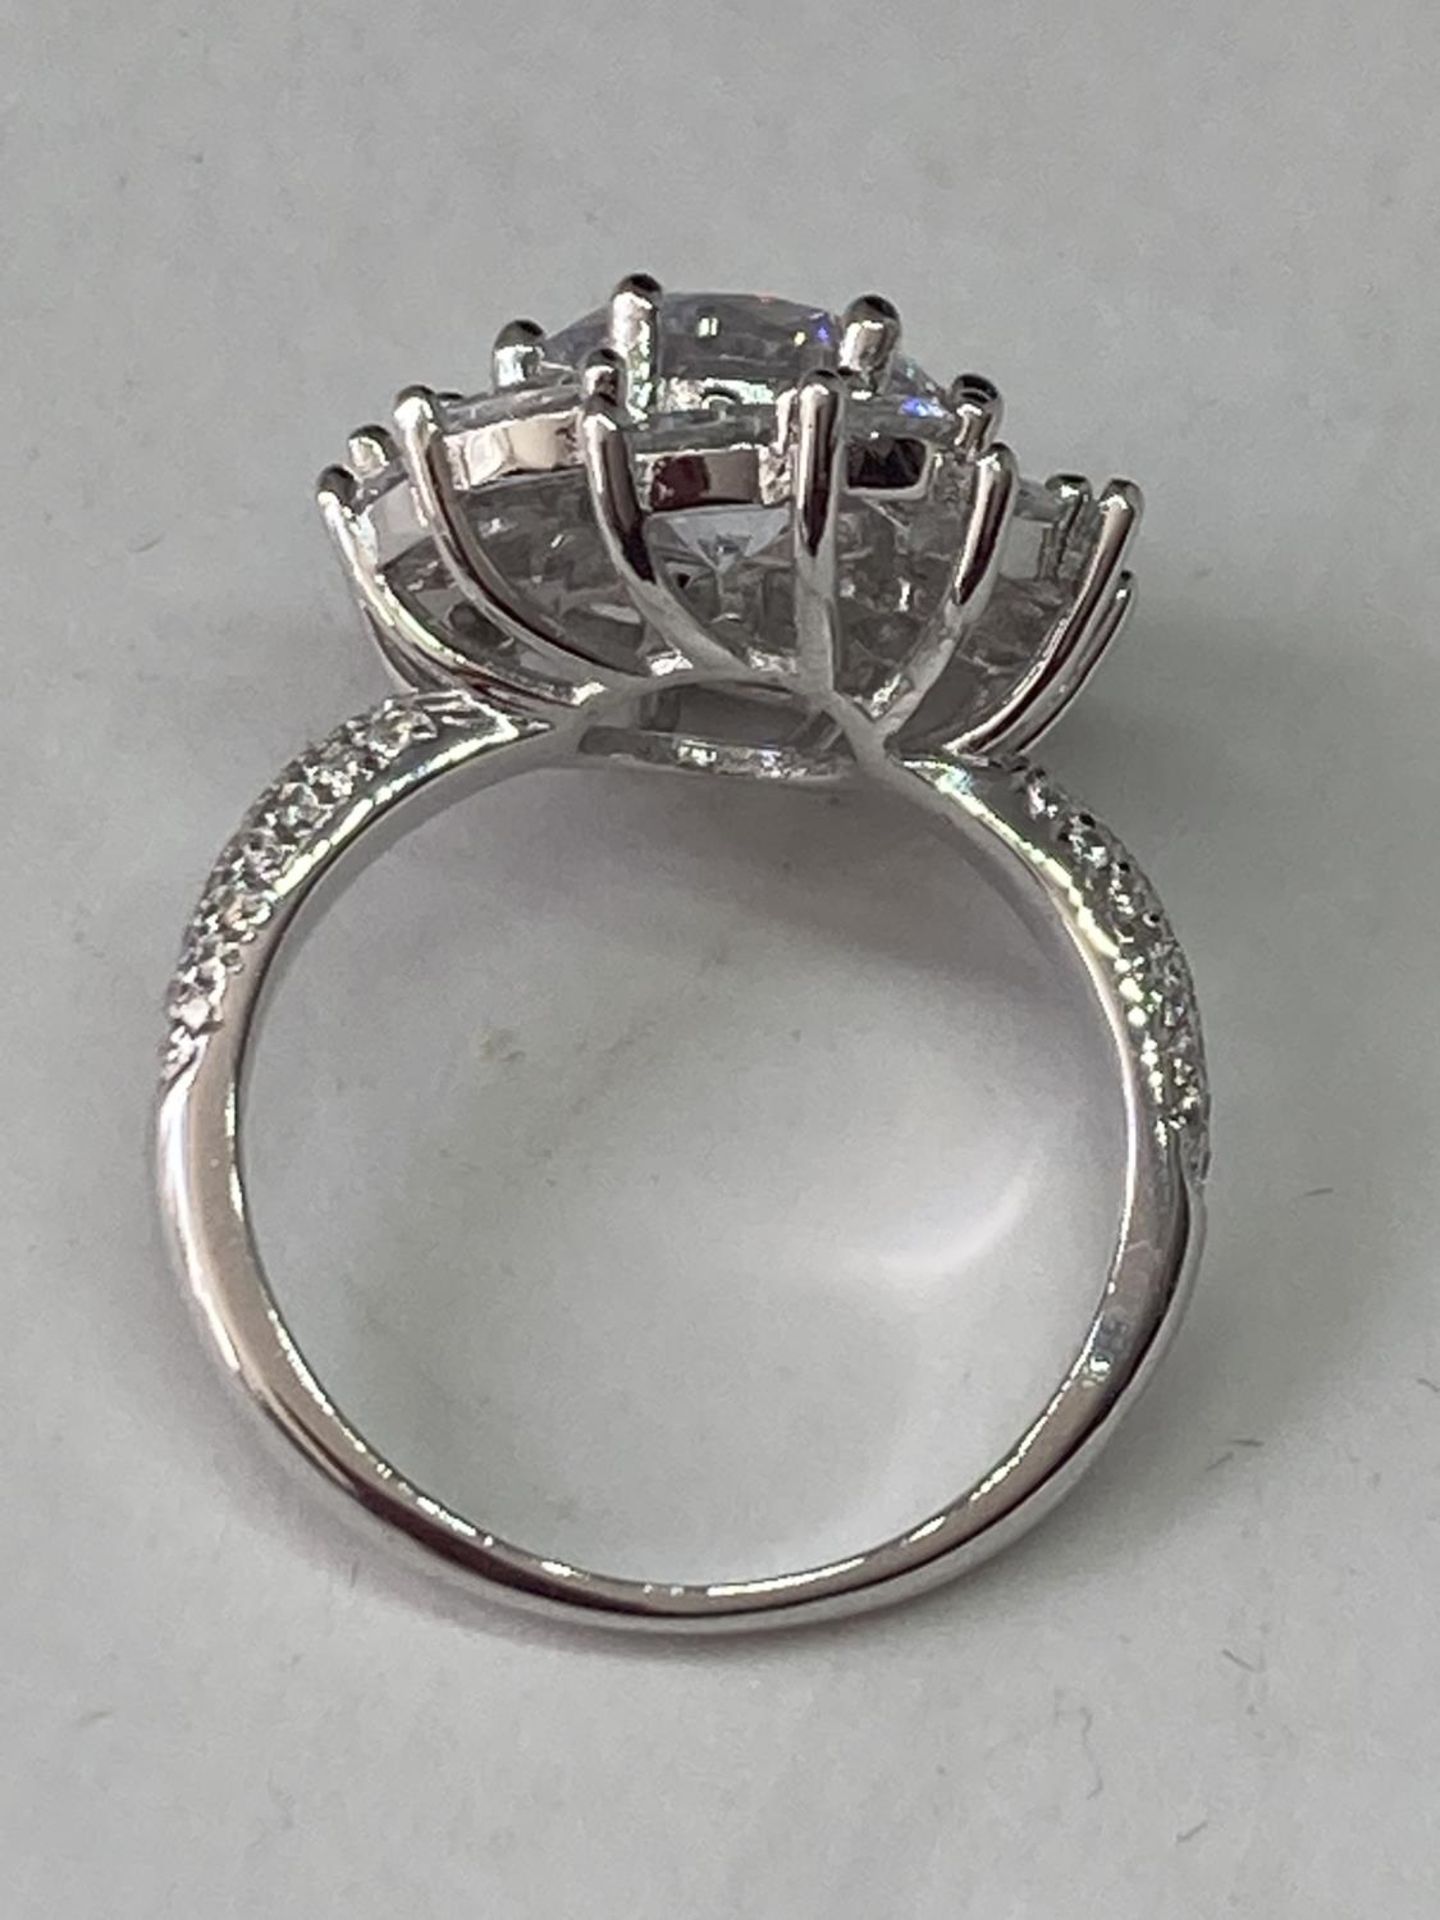 A WHITE METAL RING WITH 3 CARATS OF MOISSANITE IN A CLUSTER DESIGN SIZE Q - Image 6 of 6